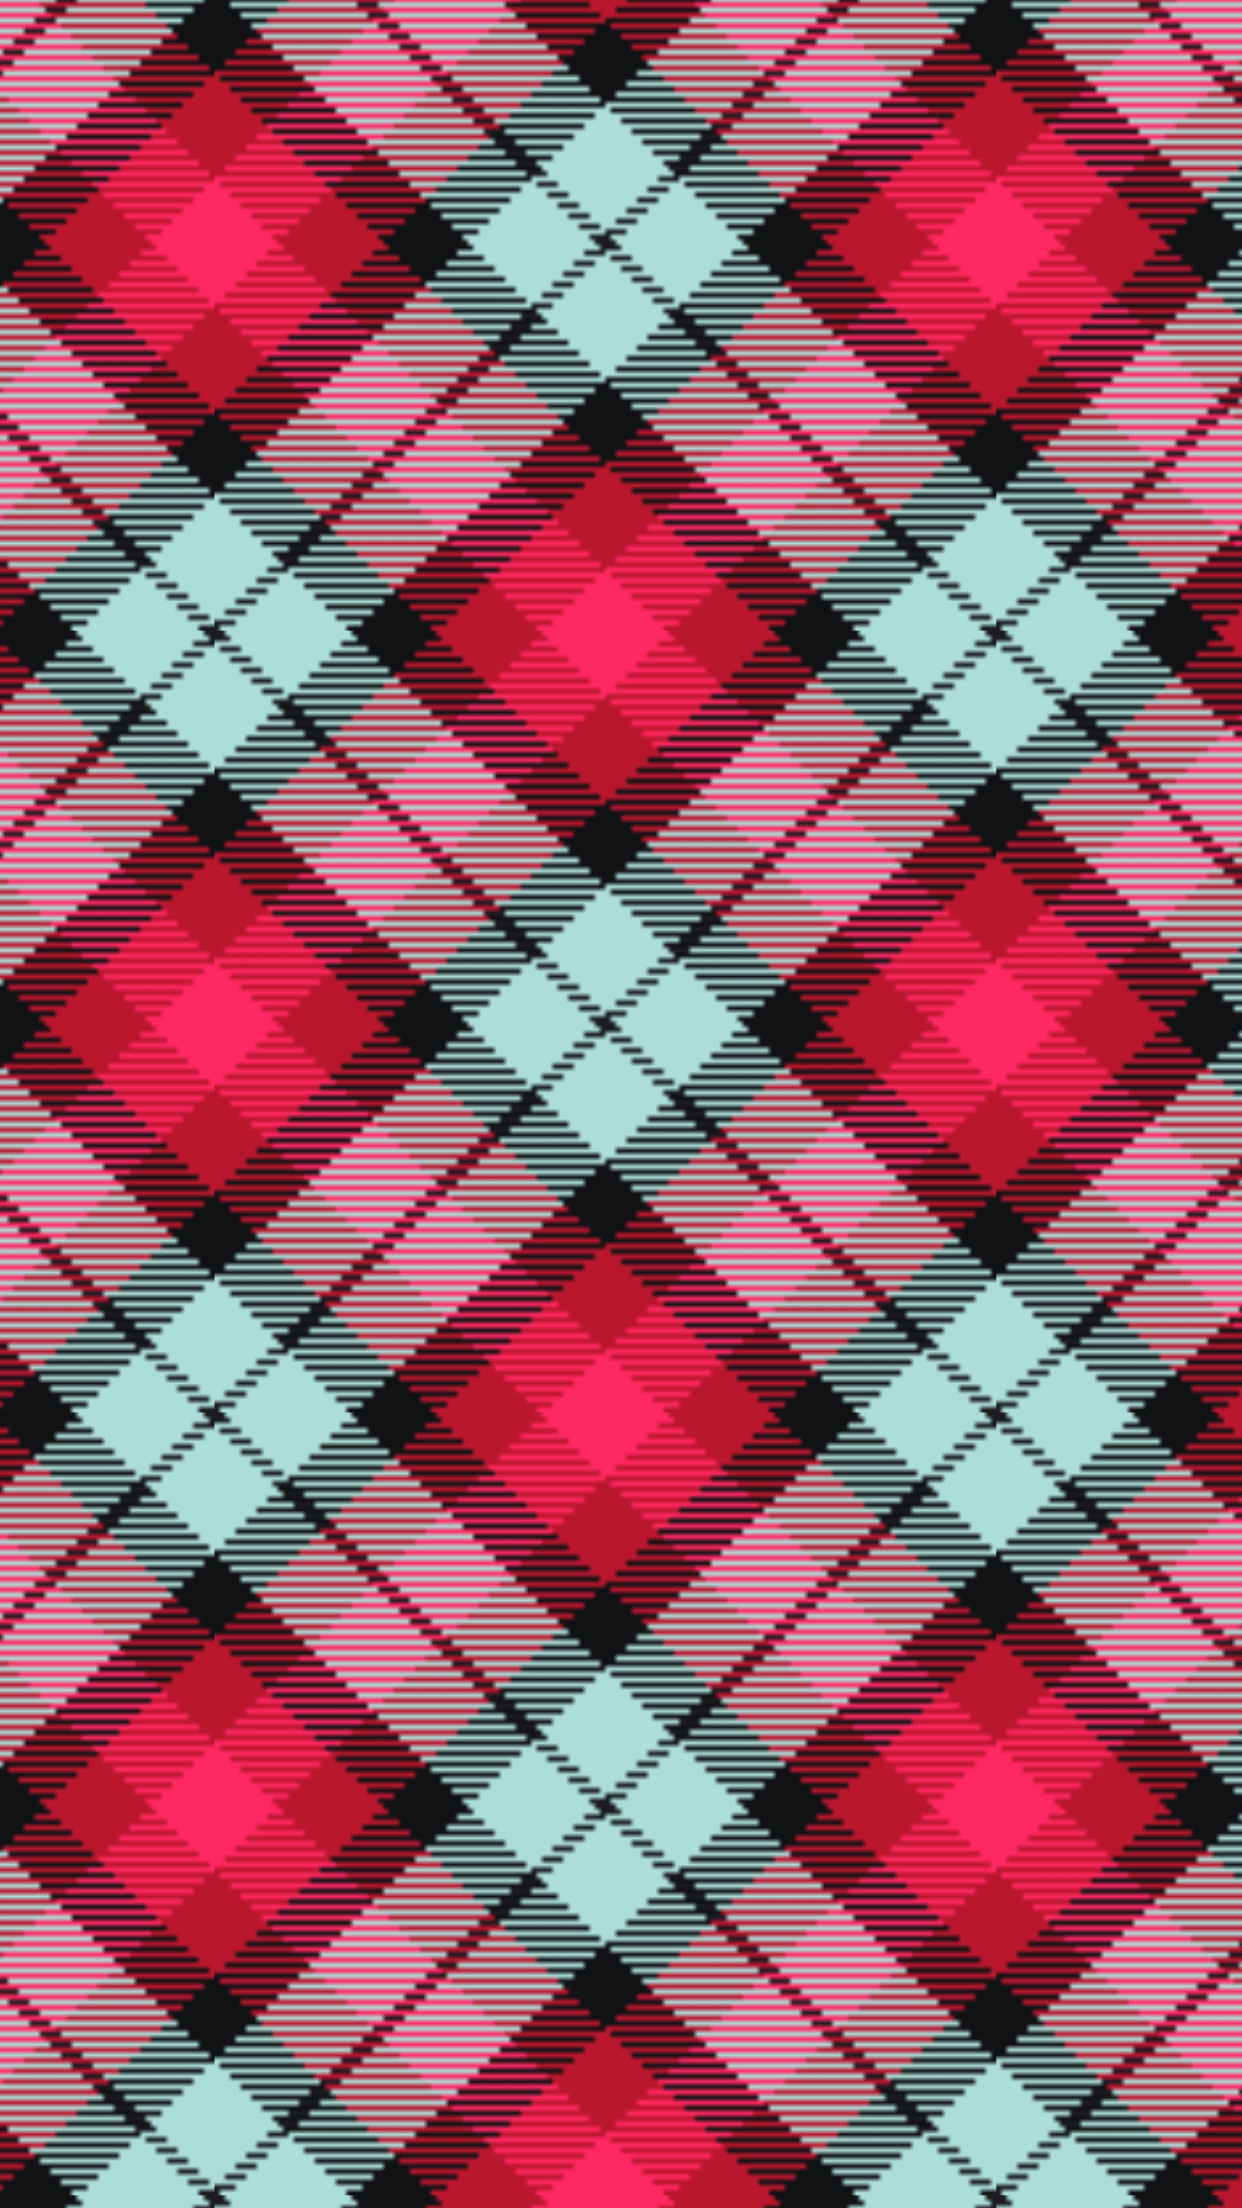 Red and Black Plaid Wallpaper Vector Images over 2500